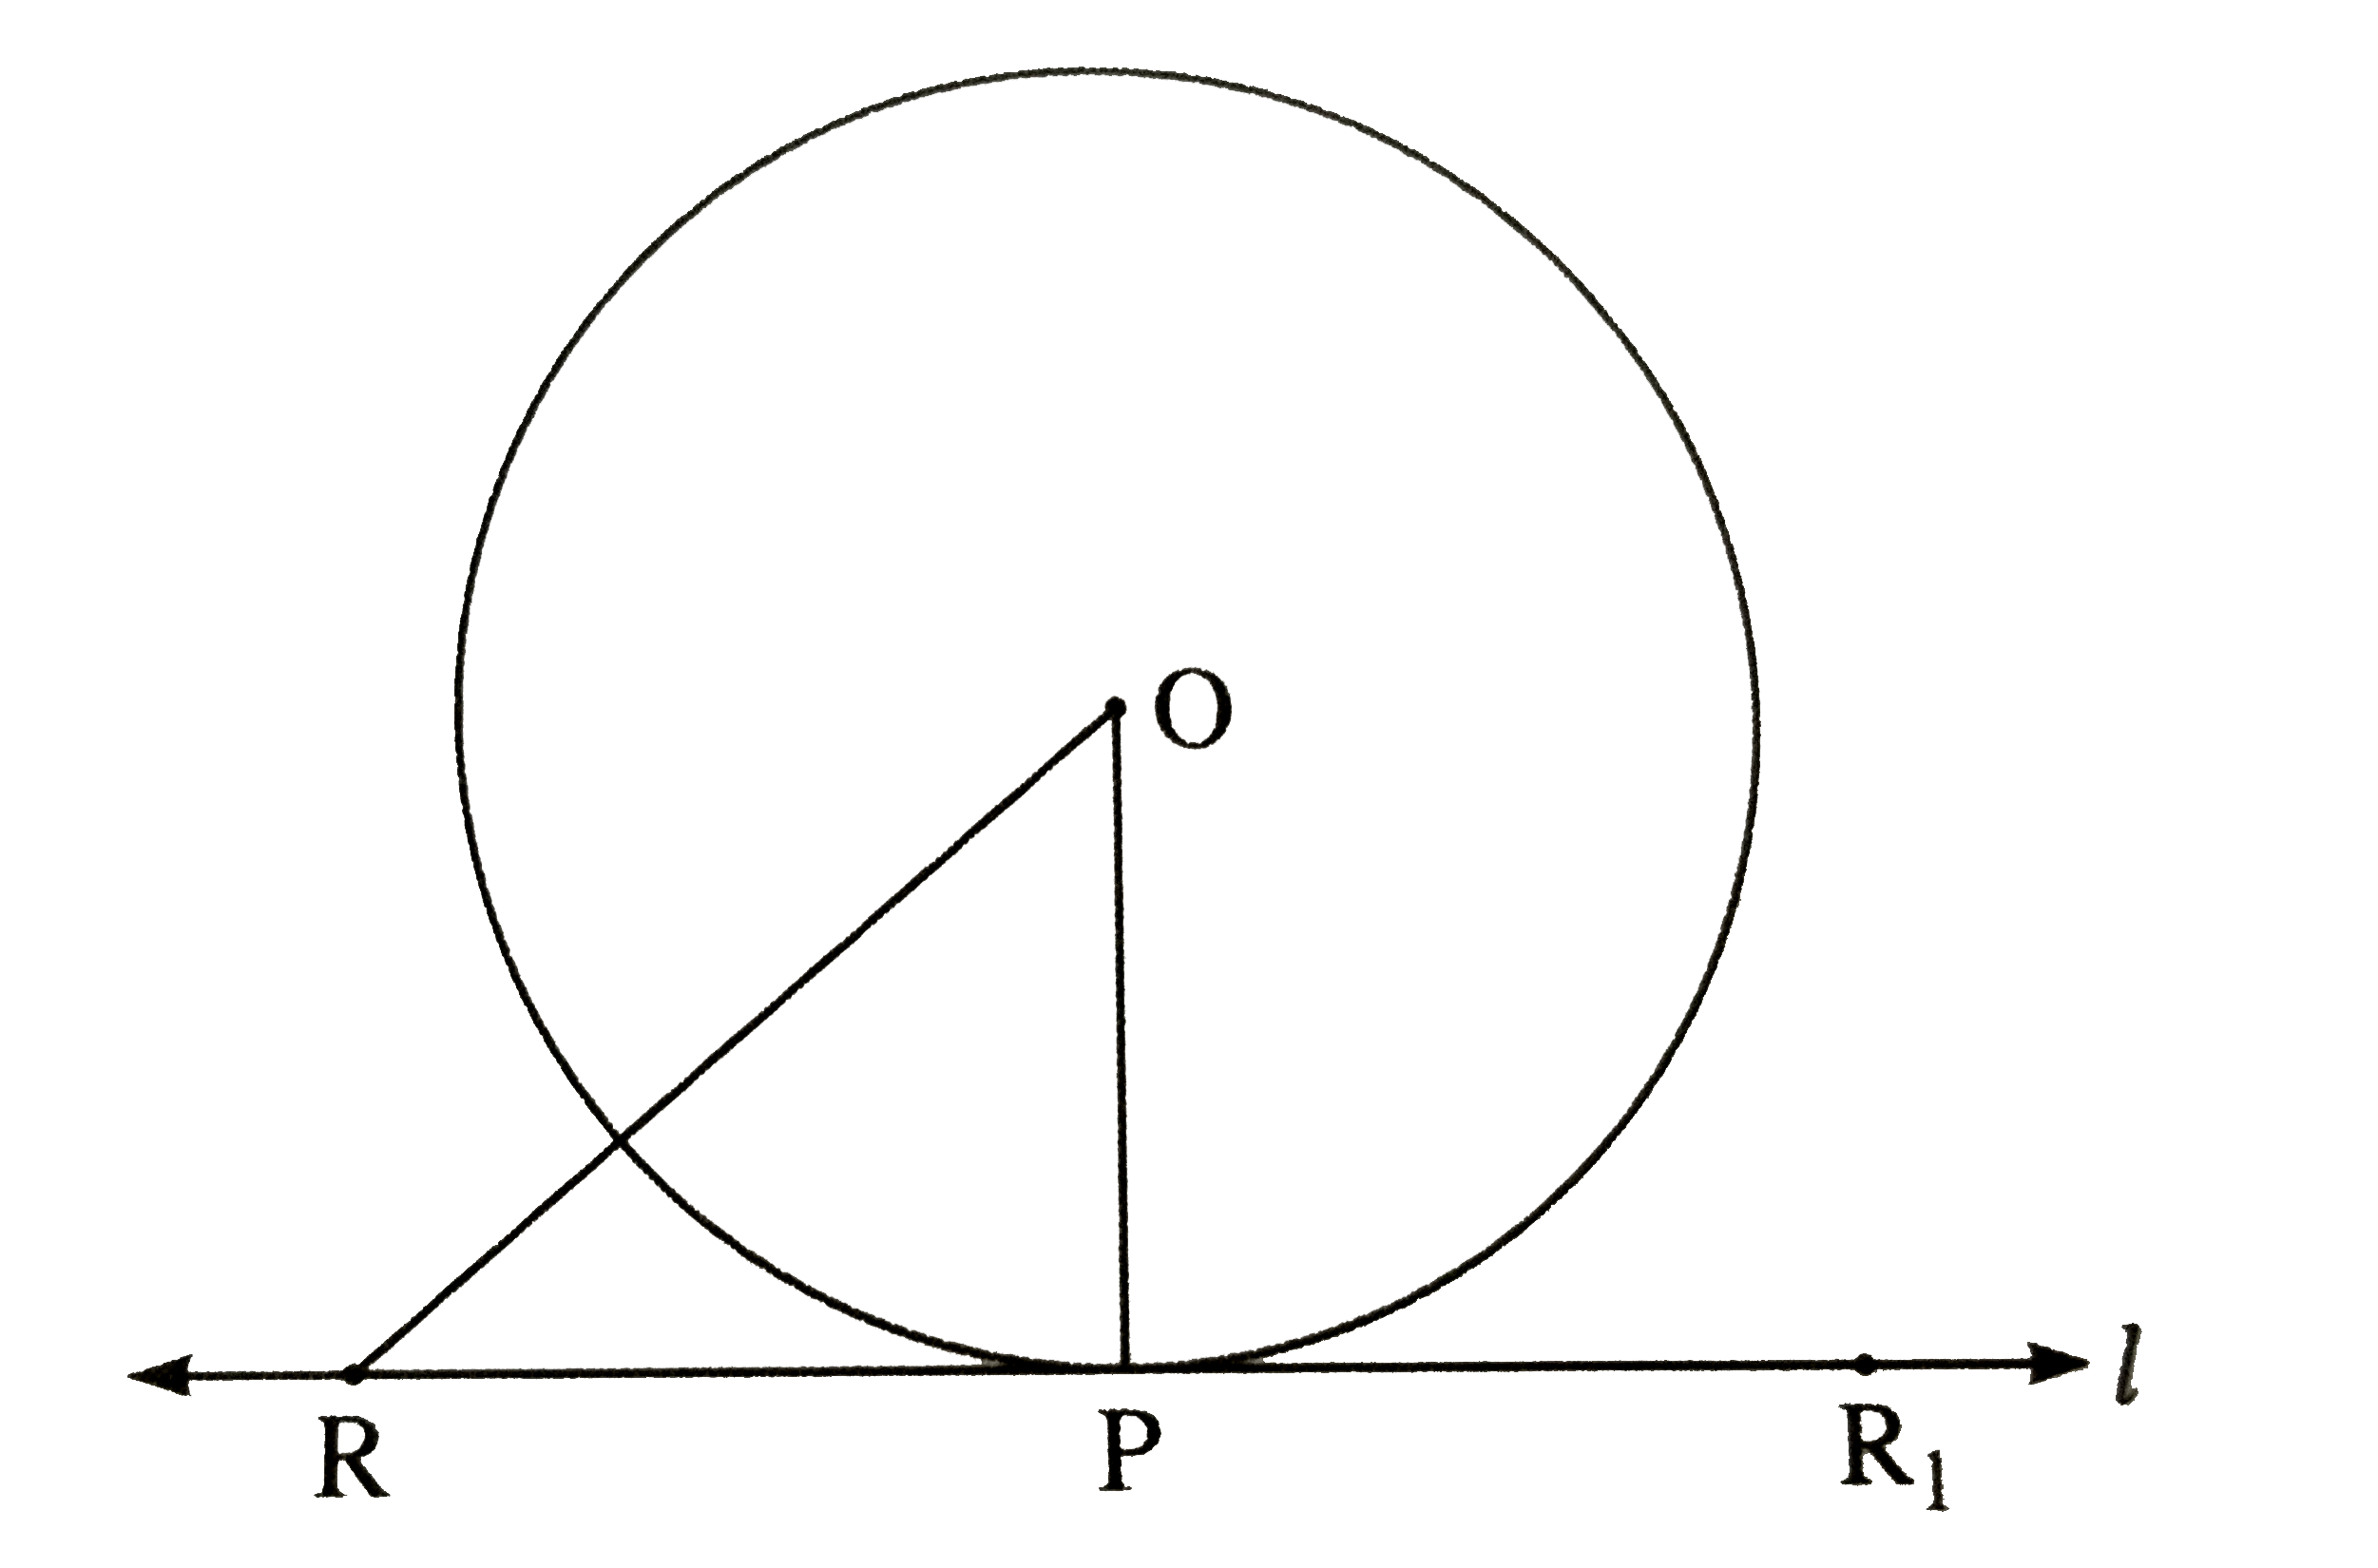 Line l touches a circle with centre O at point P. If radius of the circle is 9 cm, answer the following:   If d(O,Q)=8 cm, where does the point Q lie?